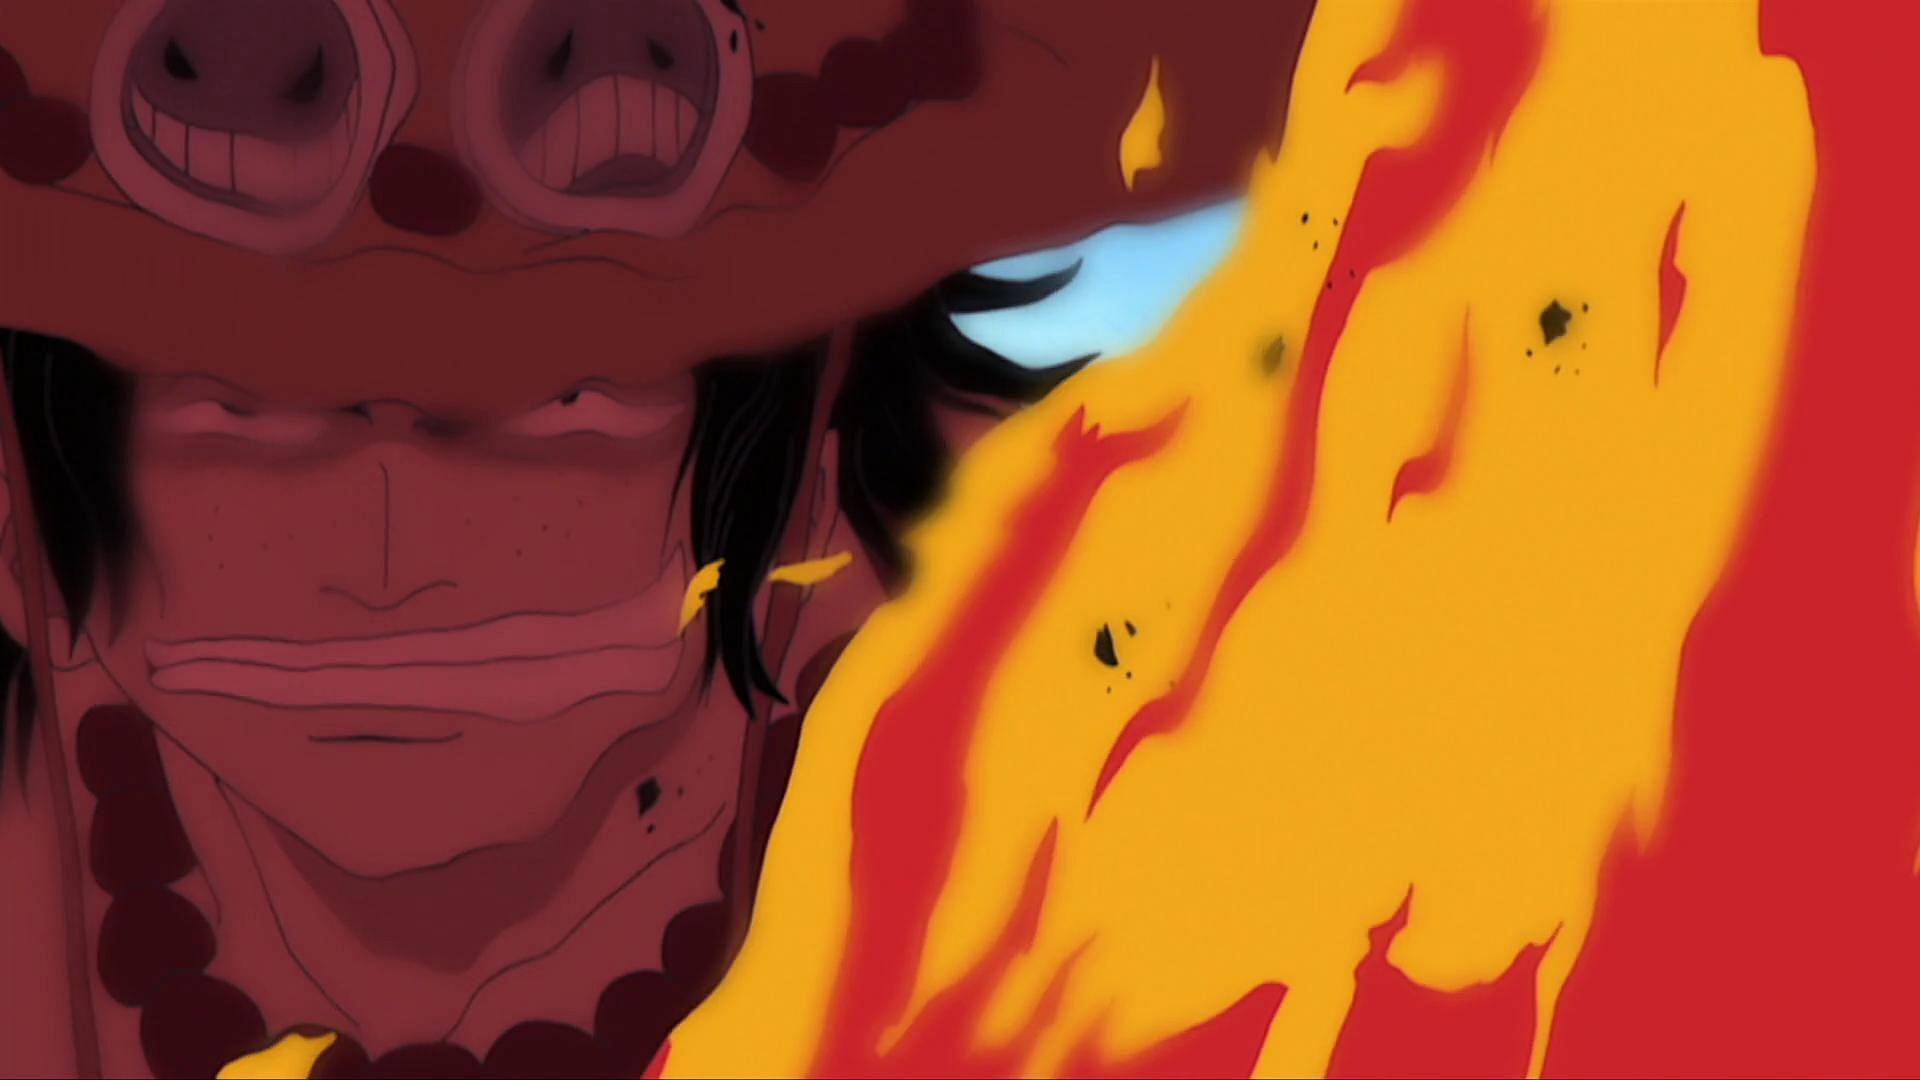 The Flame-Flame Fruit as seen in One Piece (Image via Toei Animation)